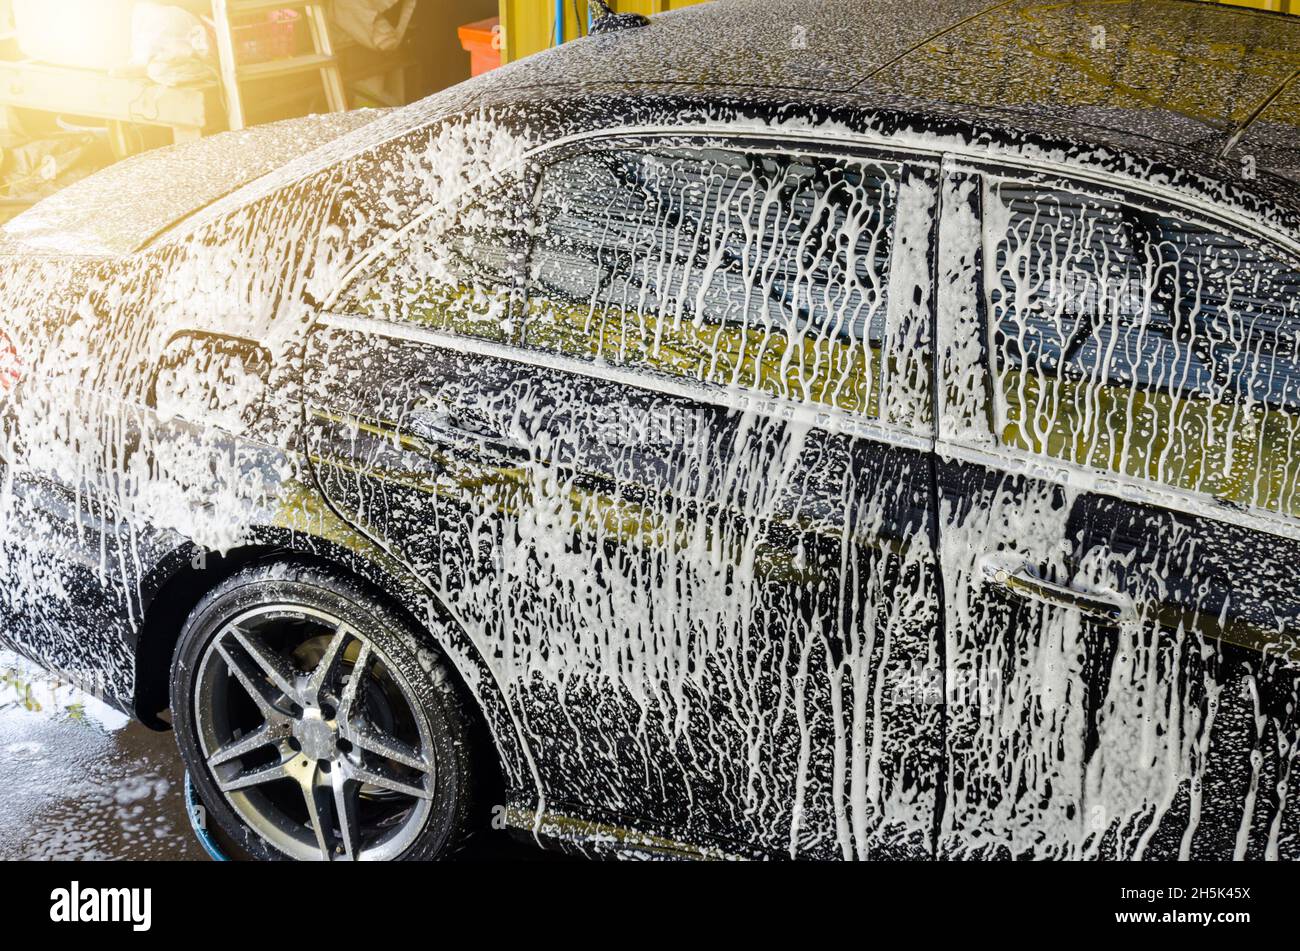 Black dirty car in white soap foam at car wash service station